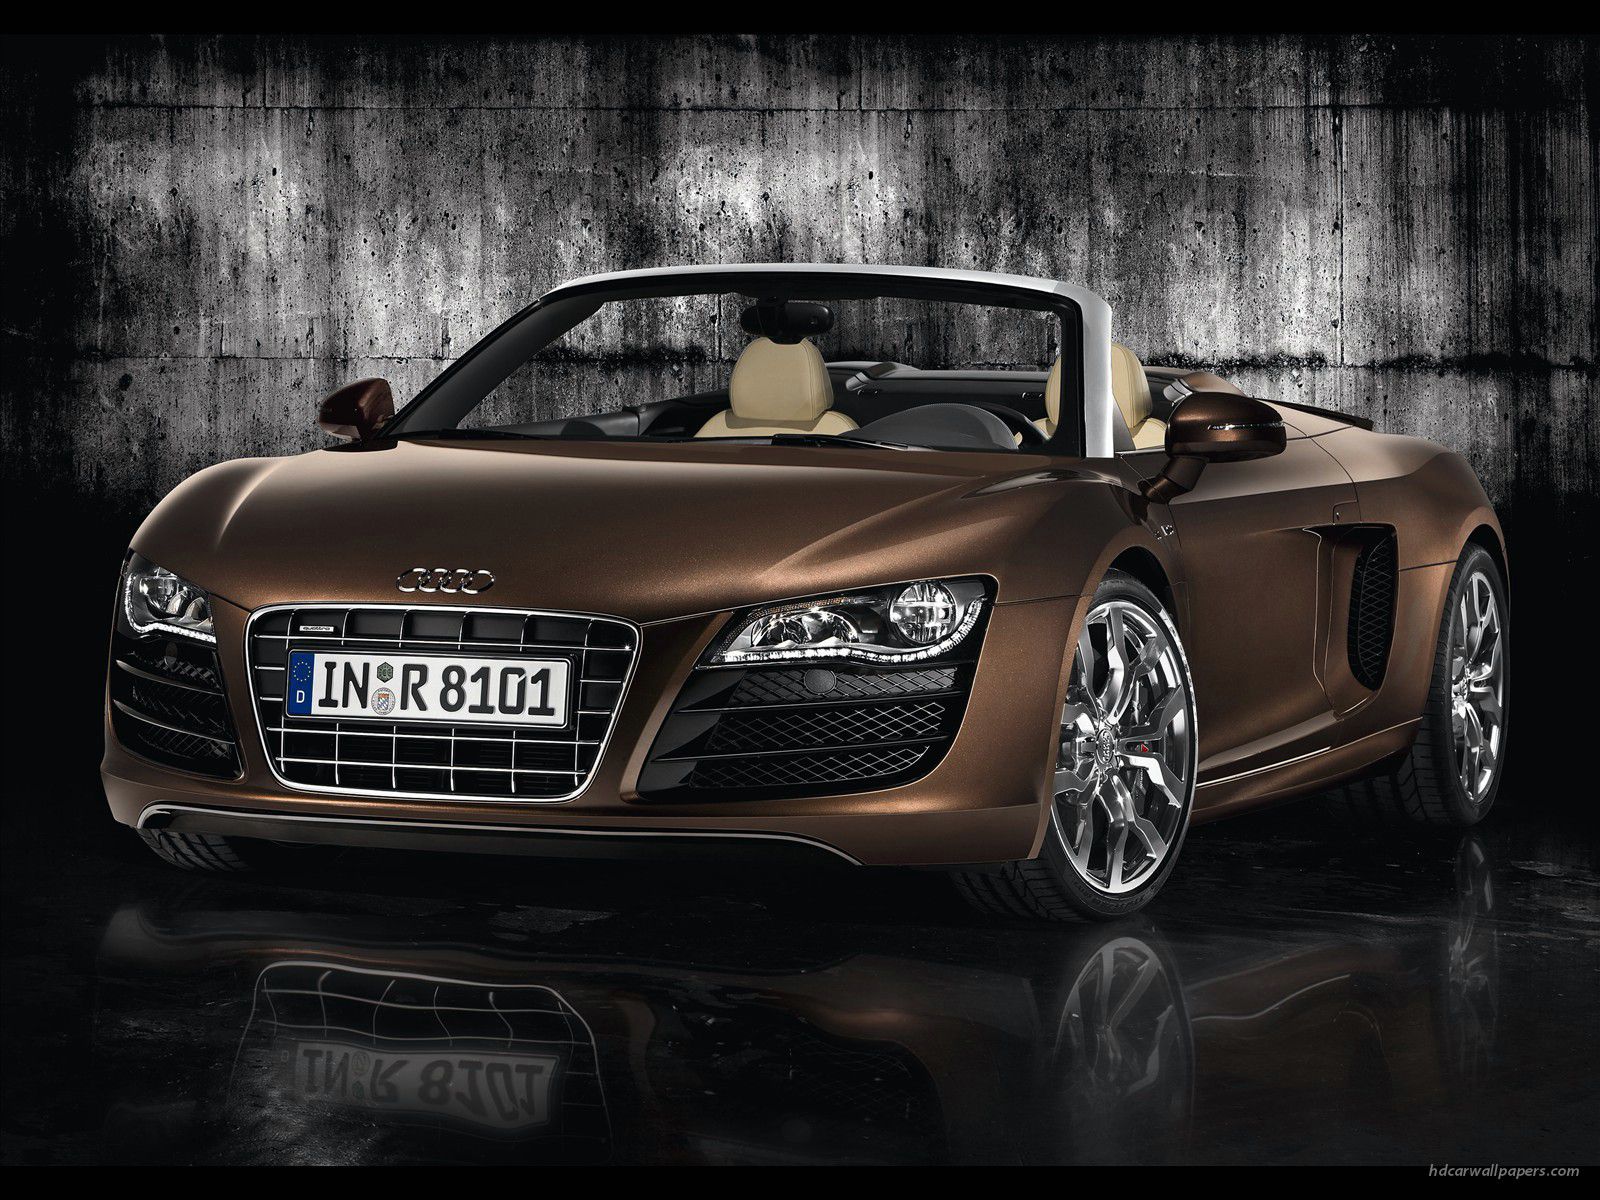 Audi R8 Super Car Pictures In All Color For Wallpaper Wallpapercare Images, Photos, Reviews